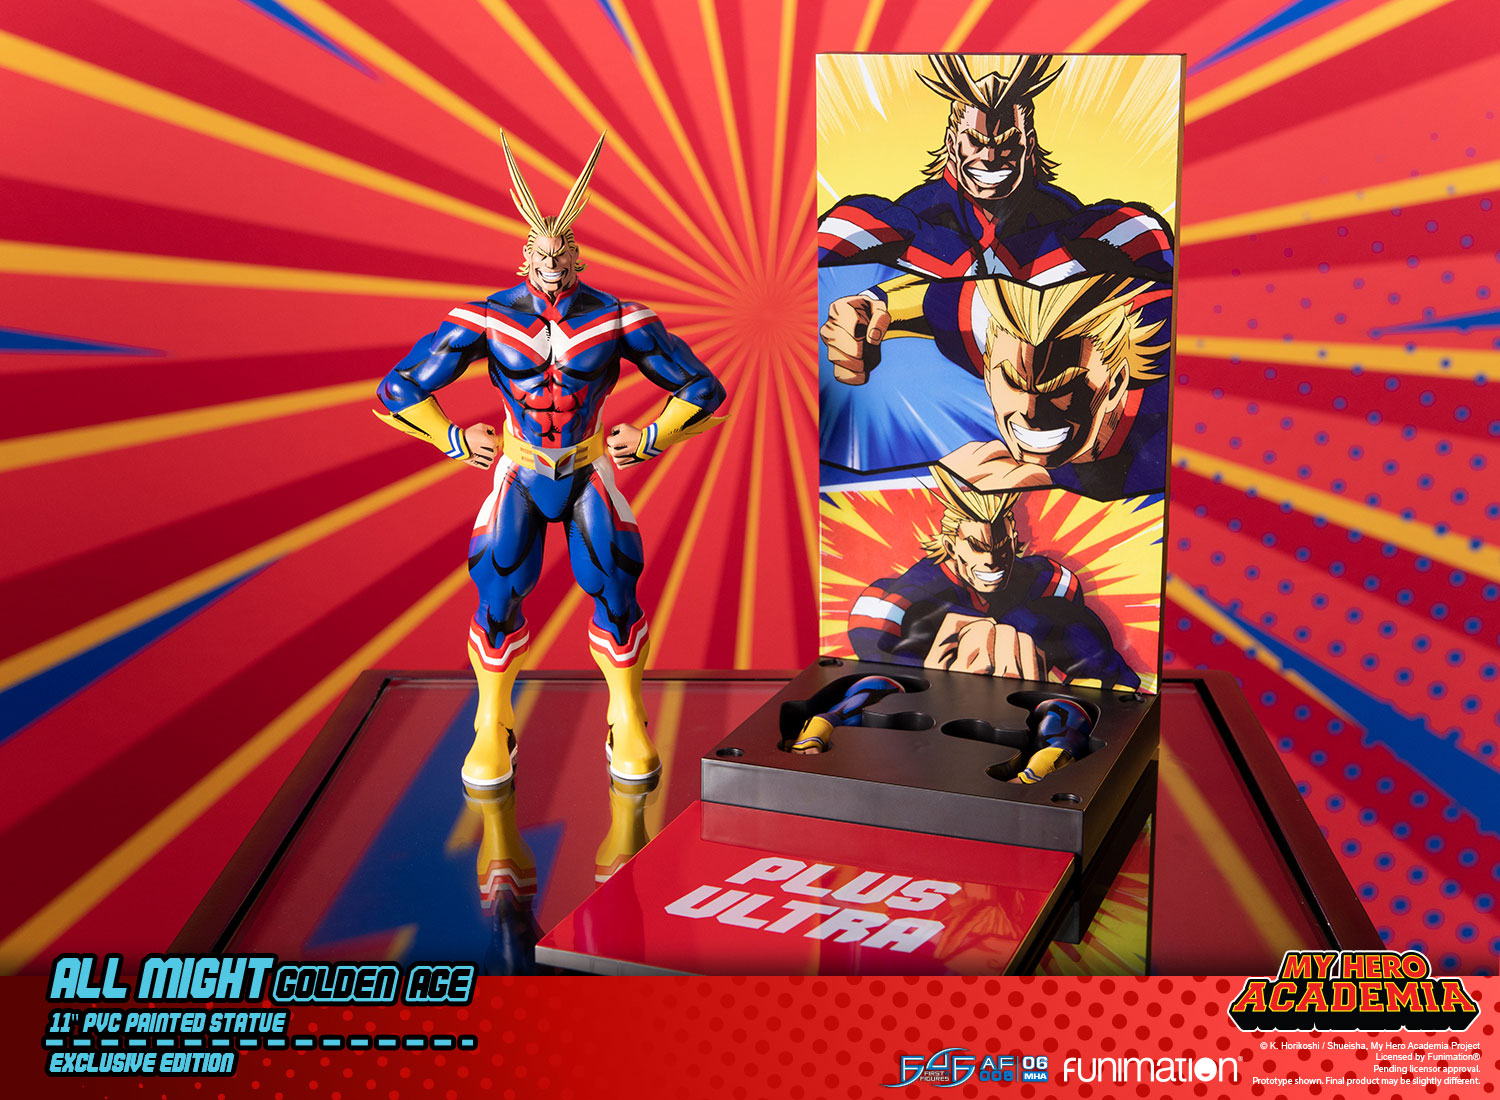 All Might: Golden Age (Exclusive Edition)